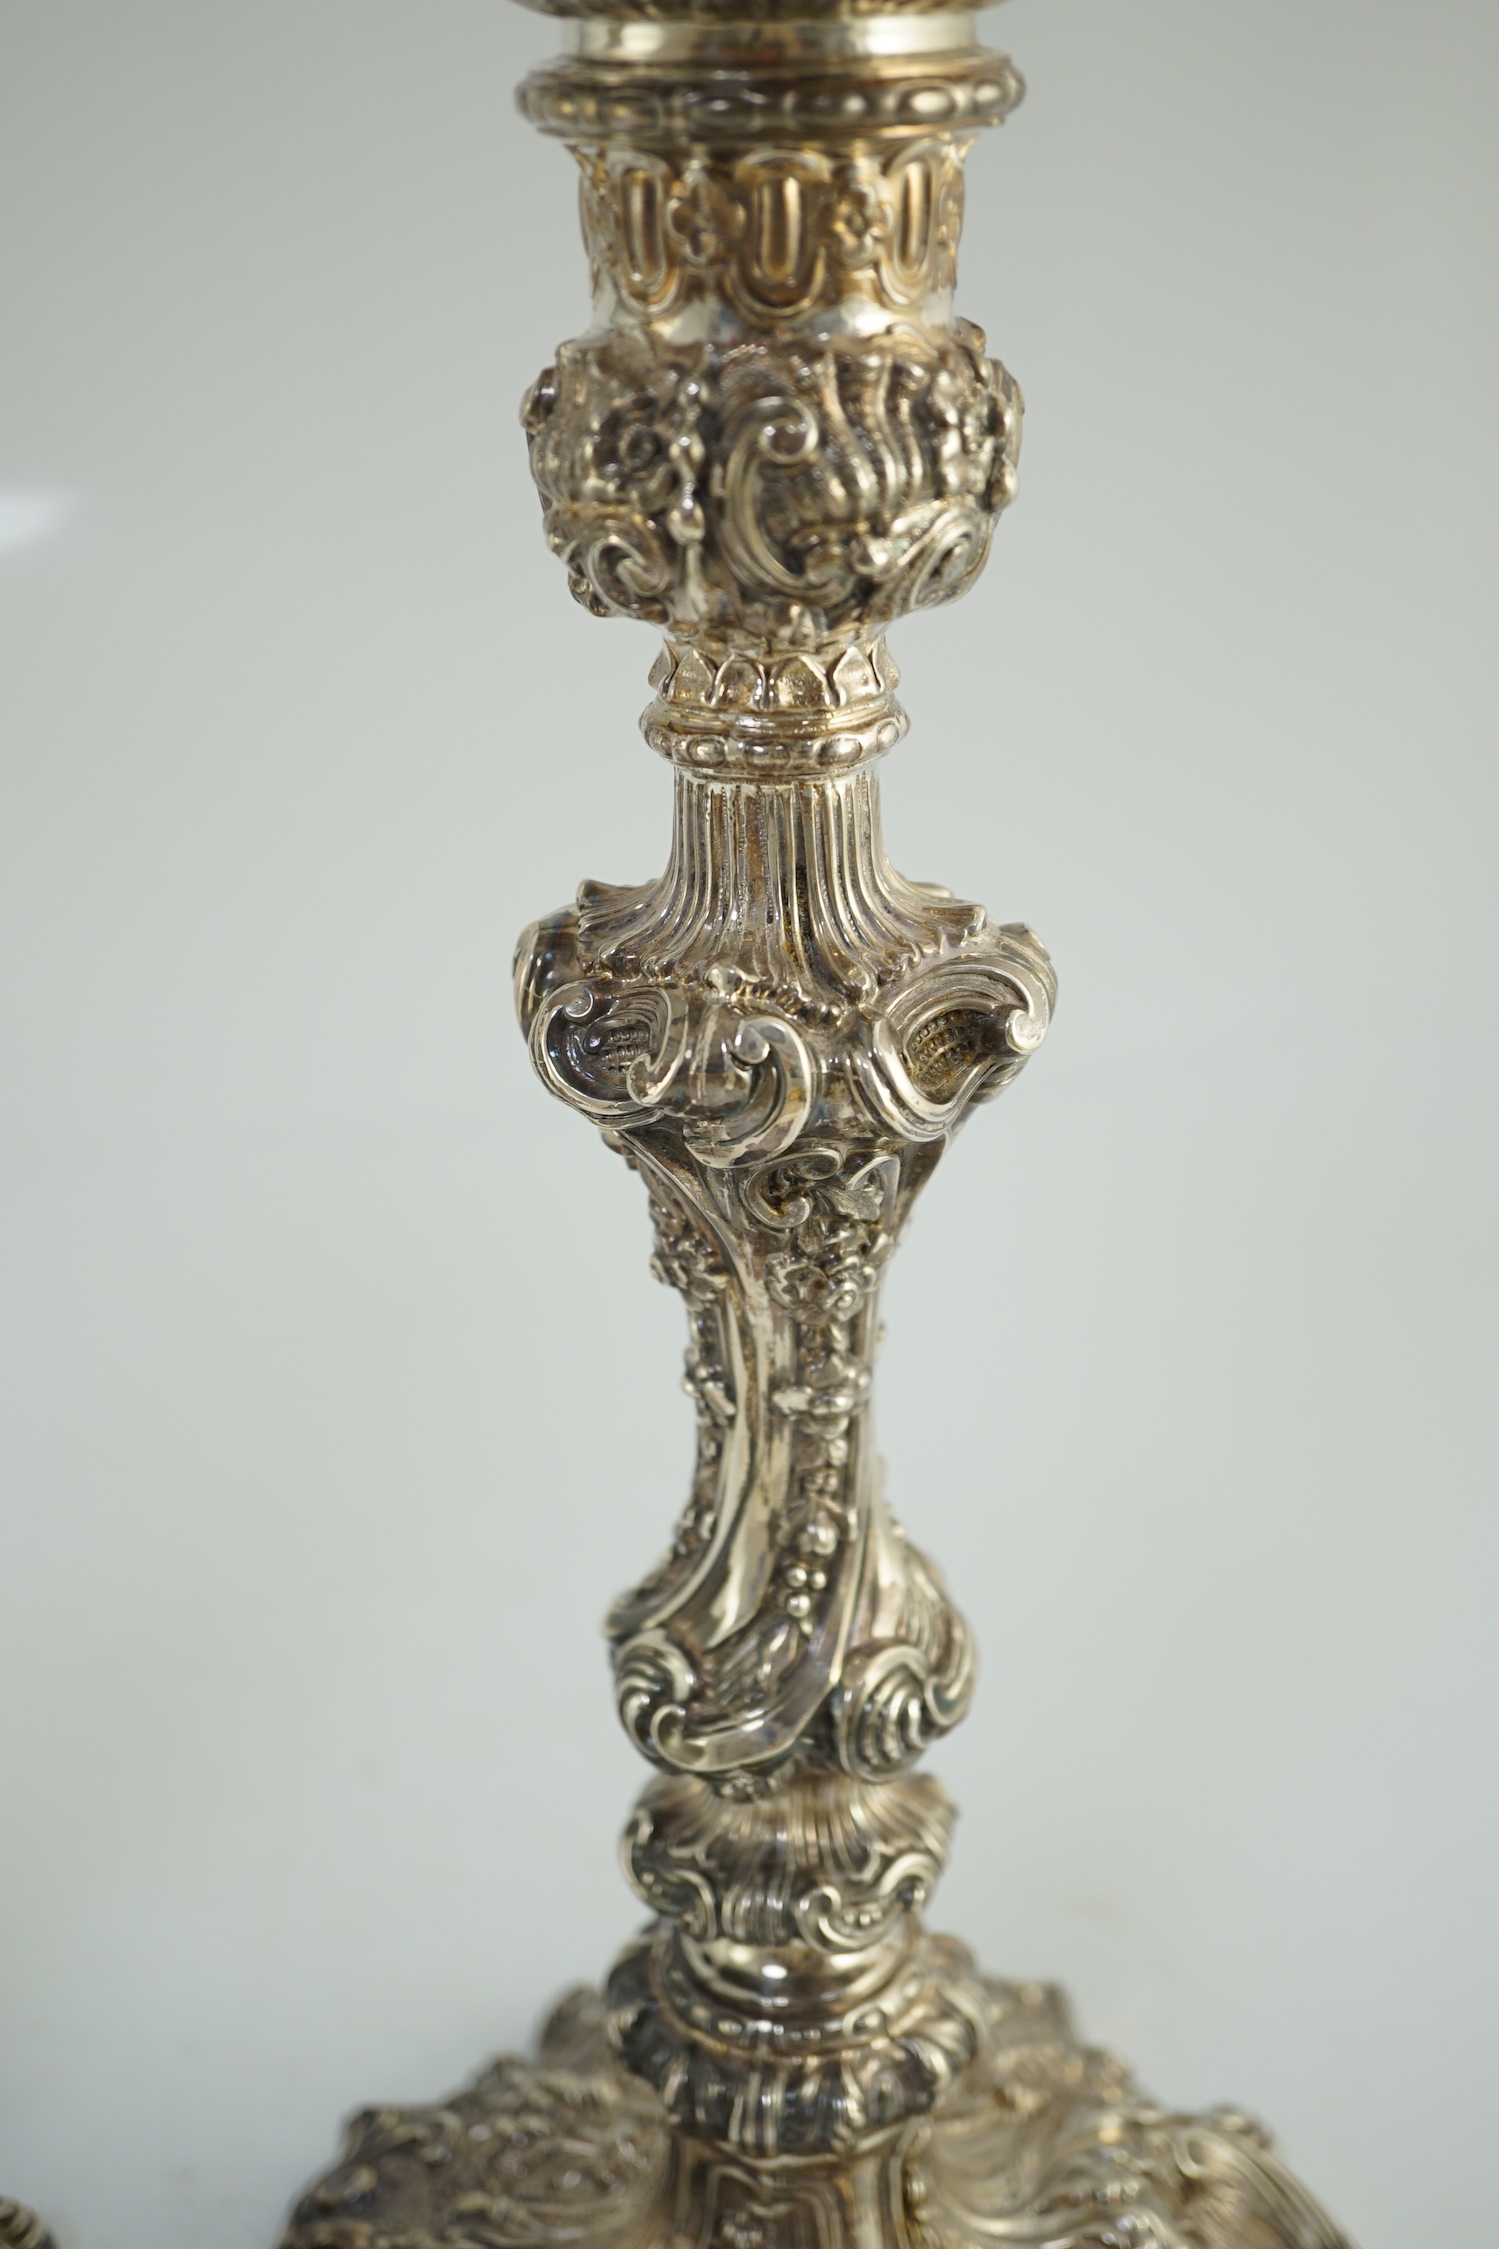 An ornate pair of Edwardian silver candlesticks, by Walker & Hall, with fixed sconces, waisted - Image 10 of 11